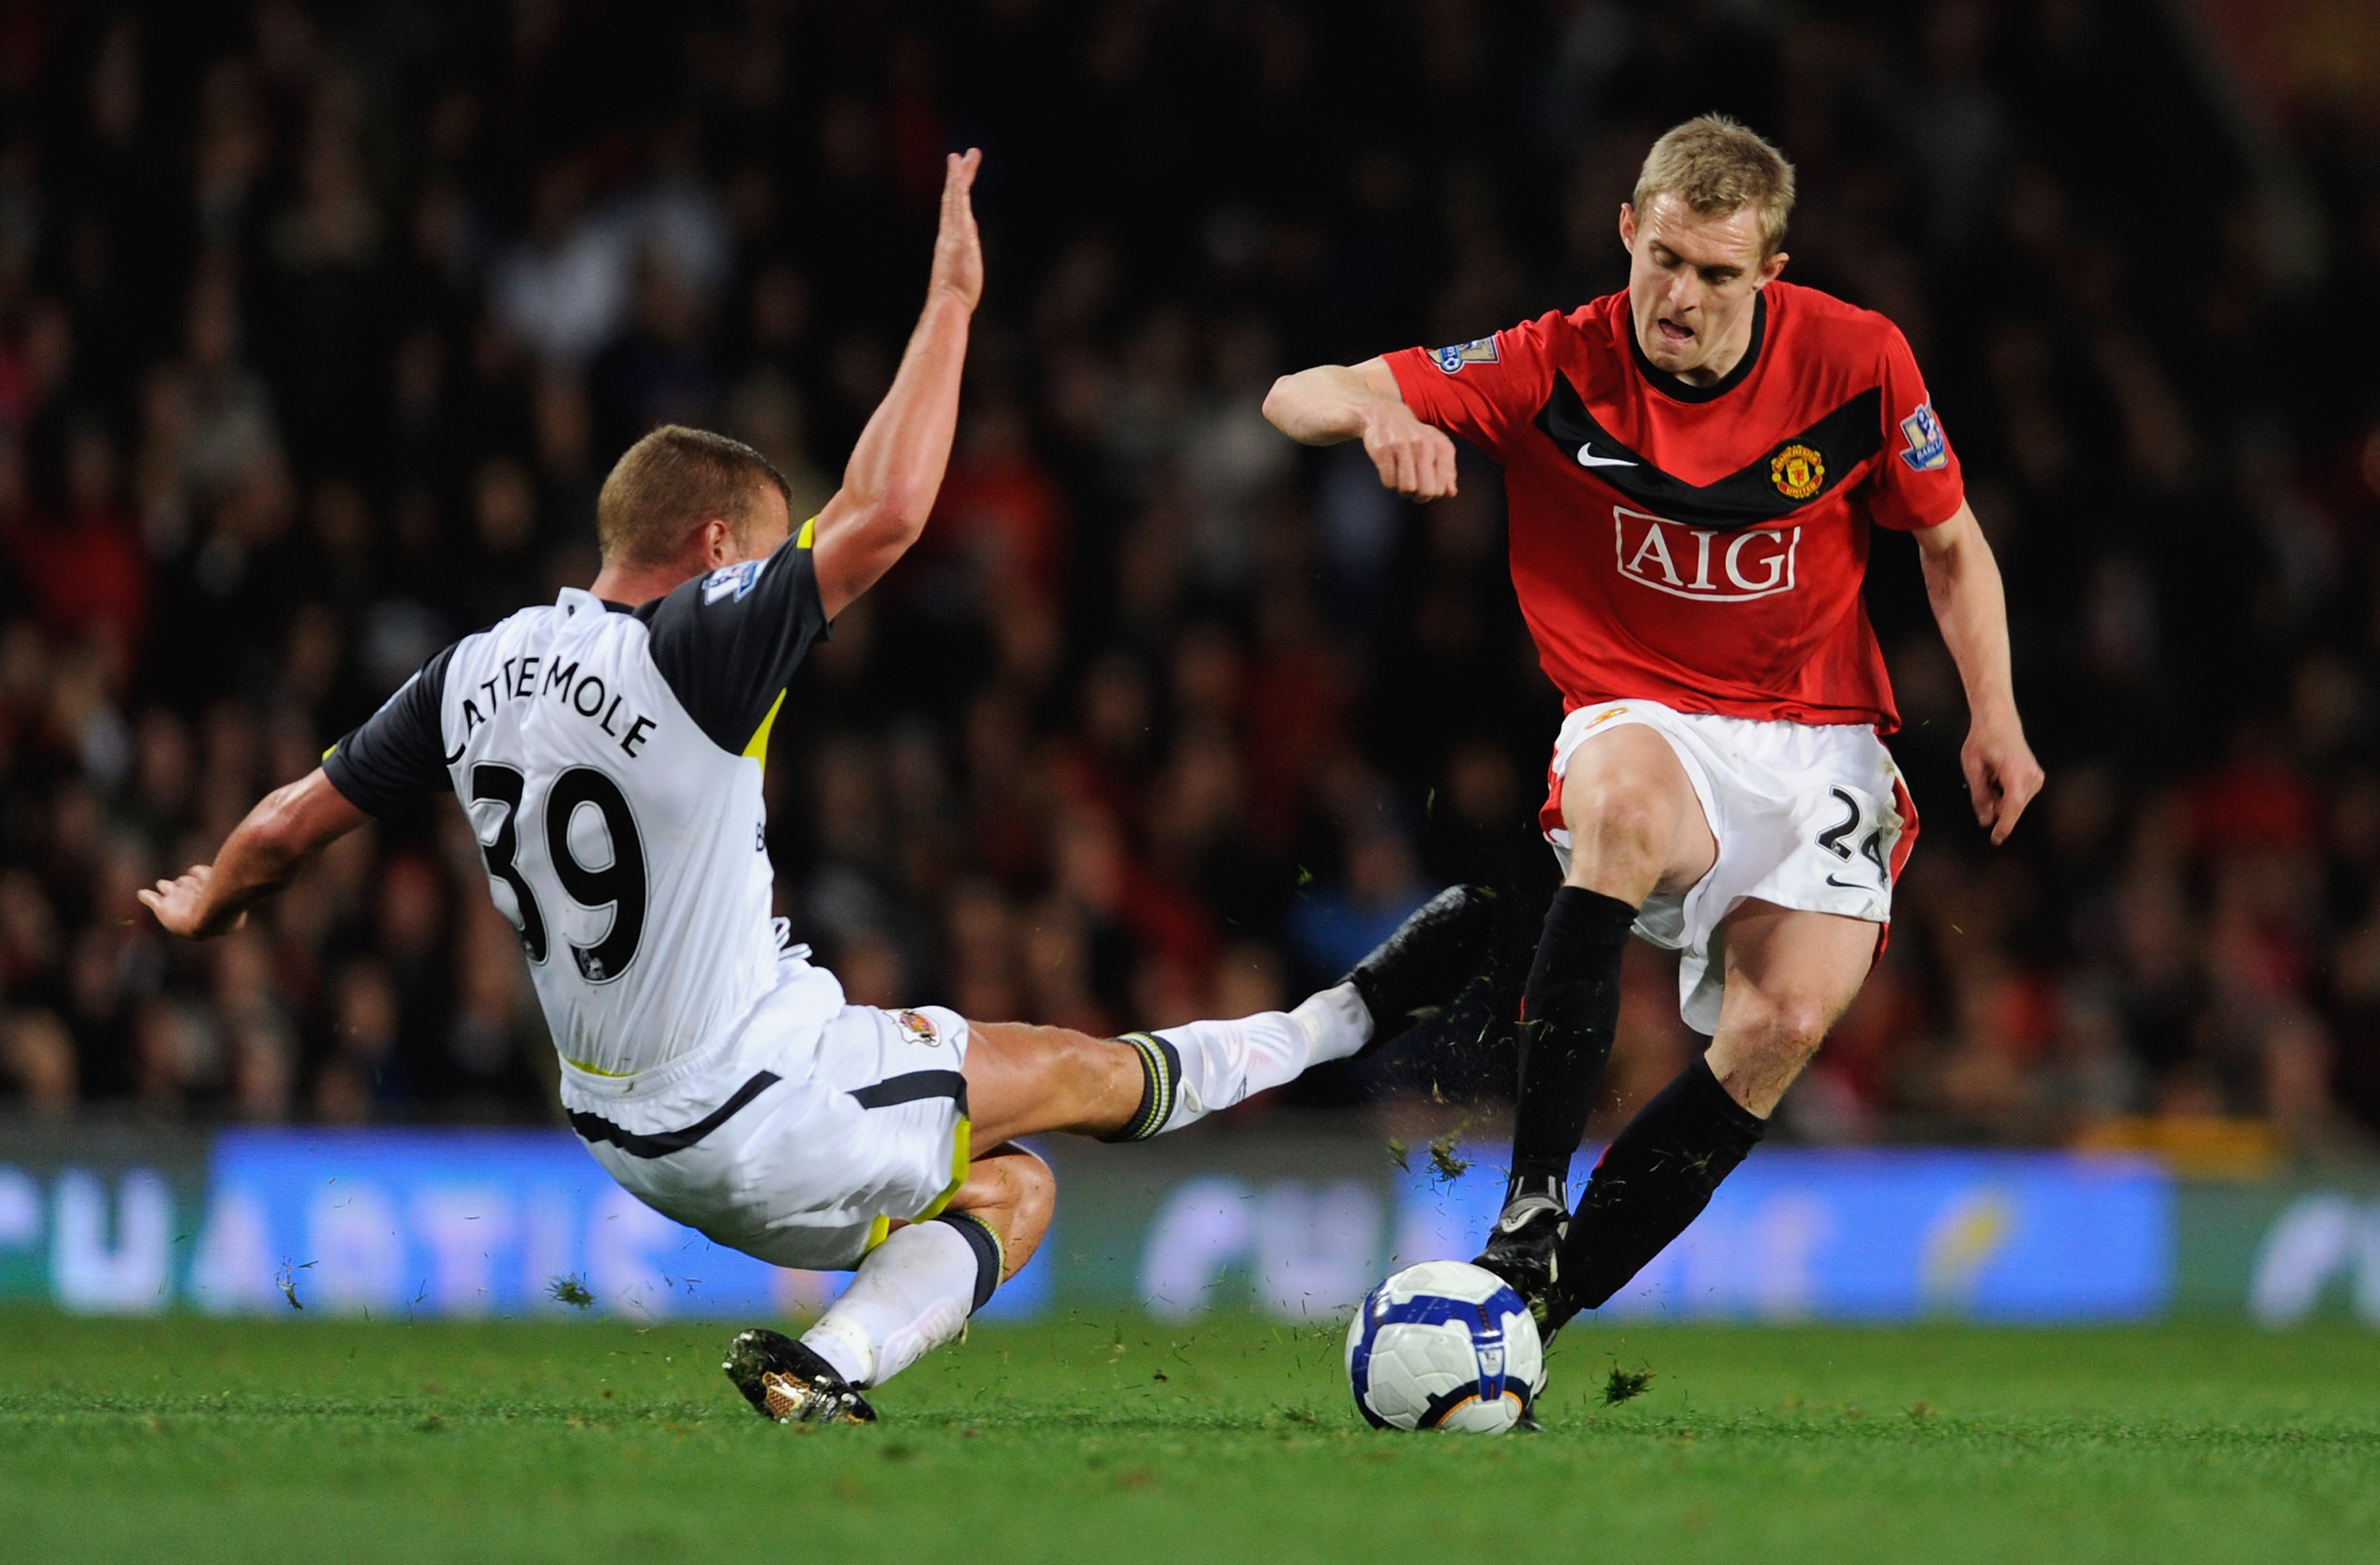 MANCHESTER, ENGLAND - OCTOBER 03:  Darren Fletcher of Manchester United is tackled by Lee Cattermole of Sunderland during the Barclays Premier League match between Manchester United and Sunderland at Old Trafford on October 3, 2009 in Manchester, England.